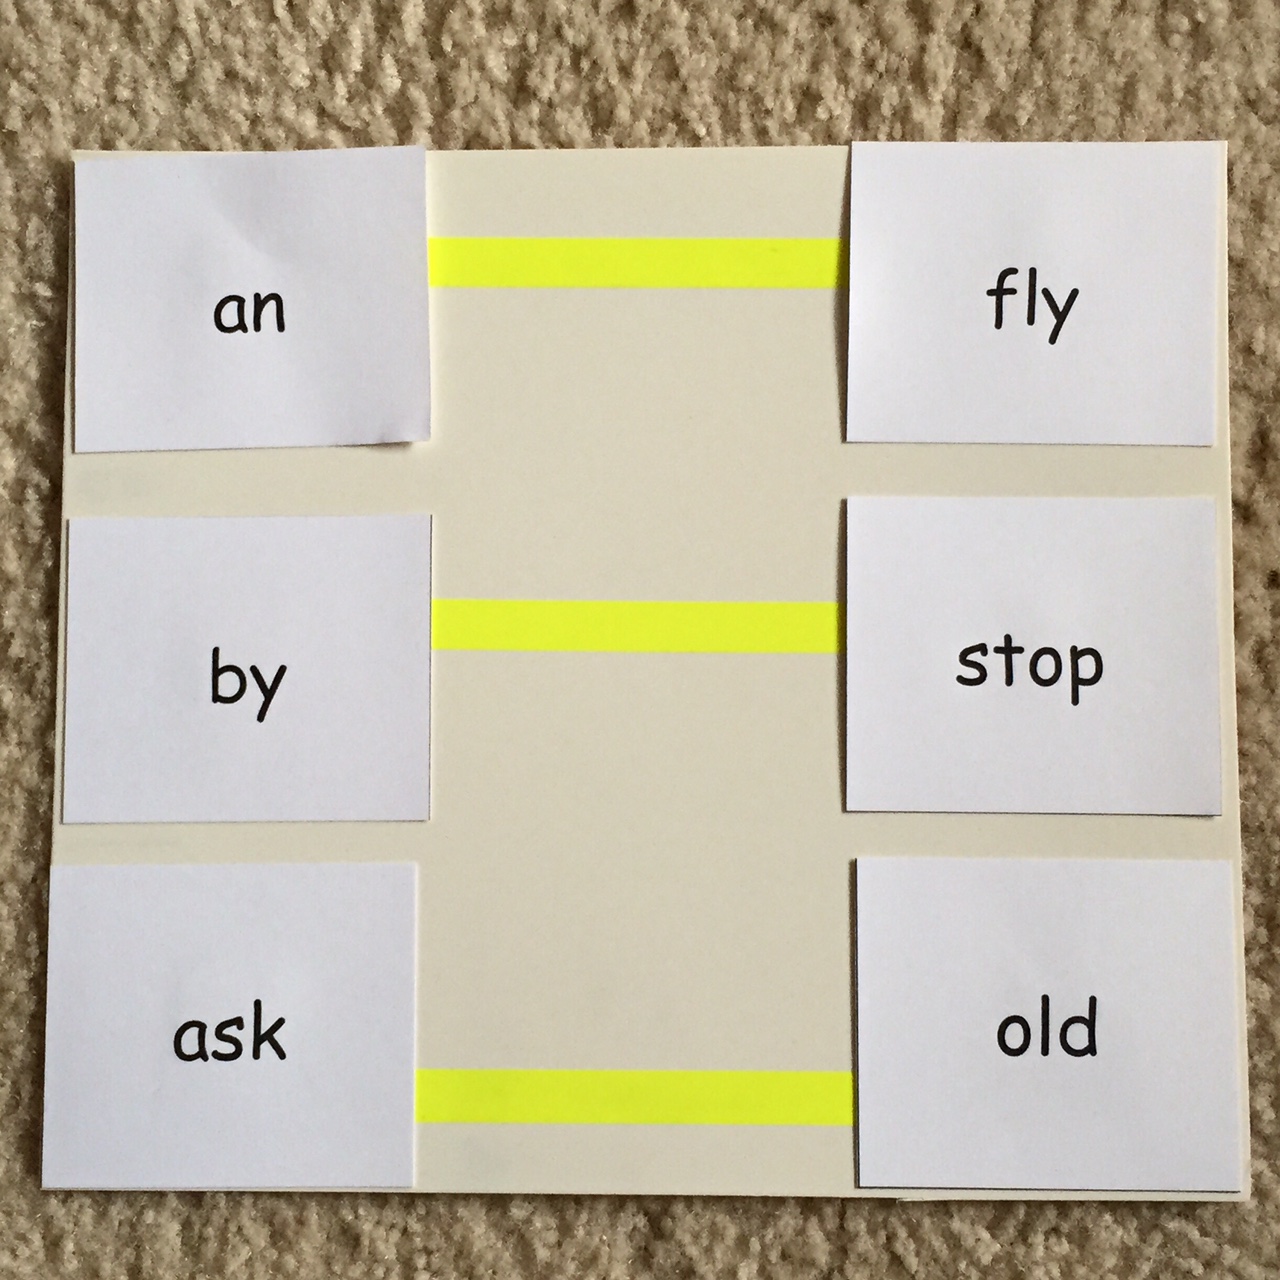 monocular words on paper with yellow tape